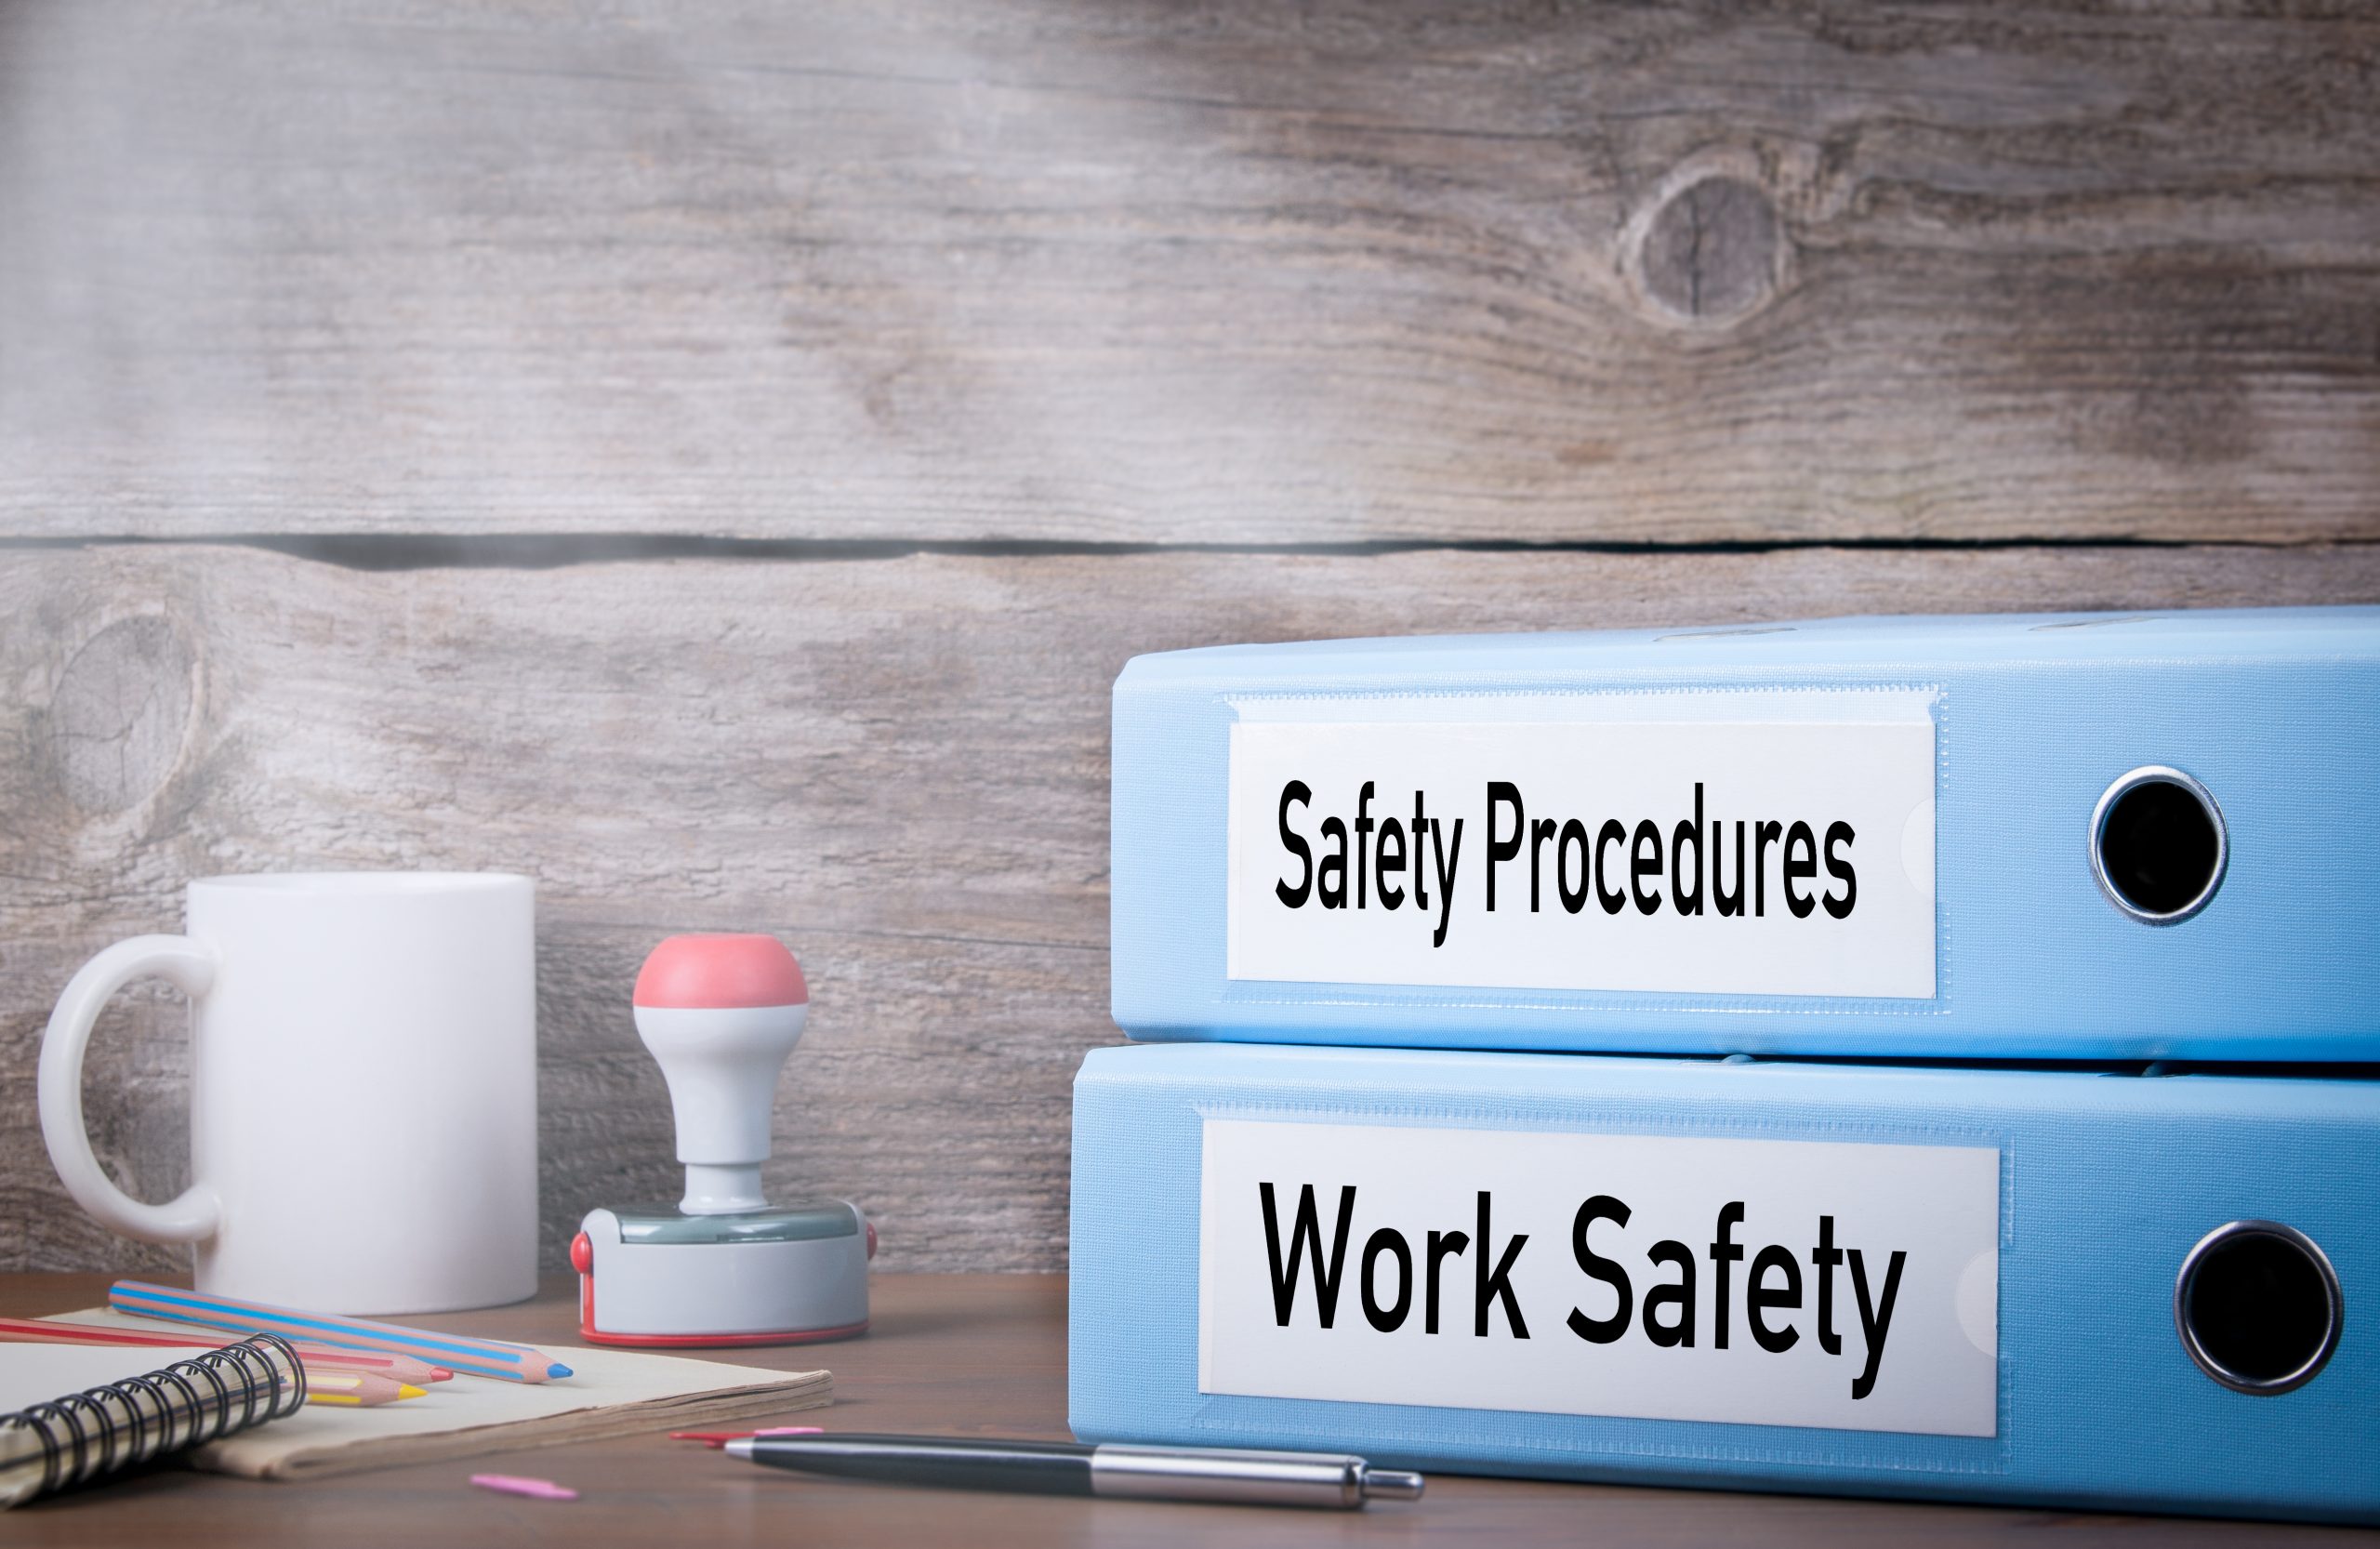 Work Safety and Safety Procedures. Two binders on desk in the office. Business background.